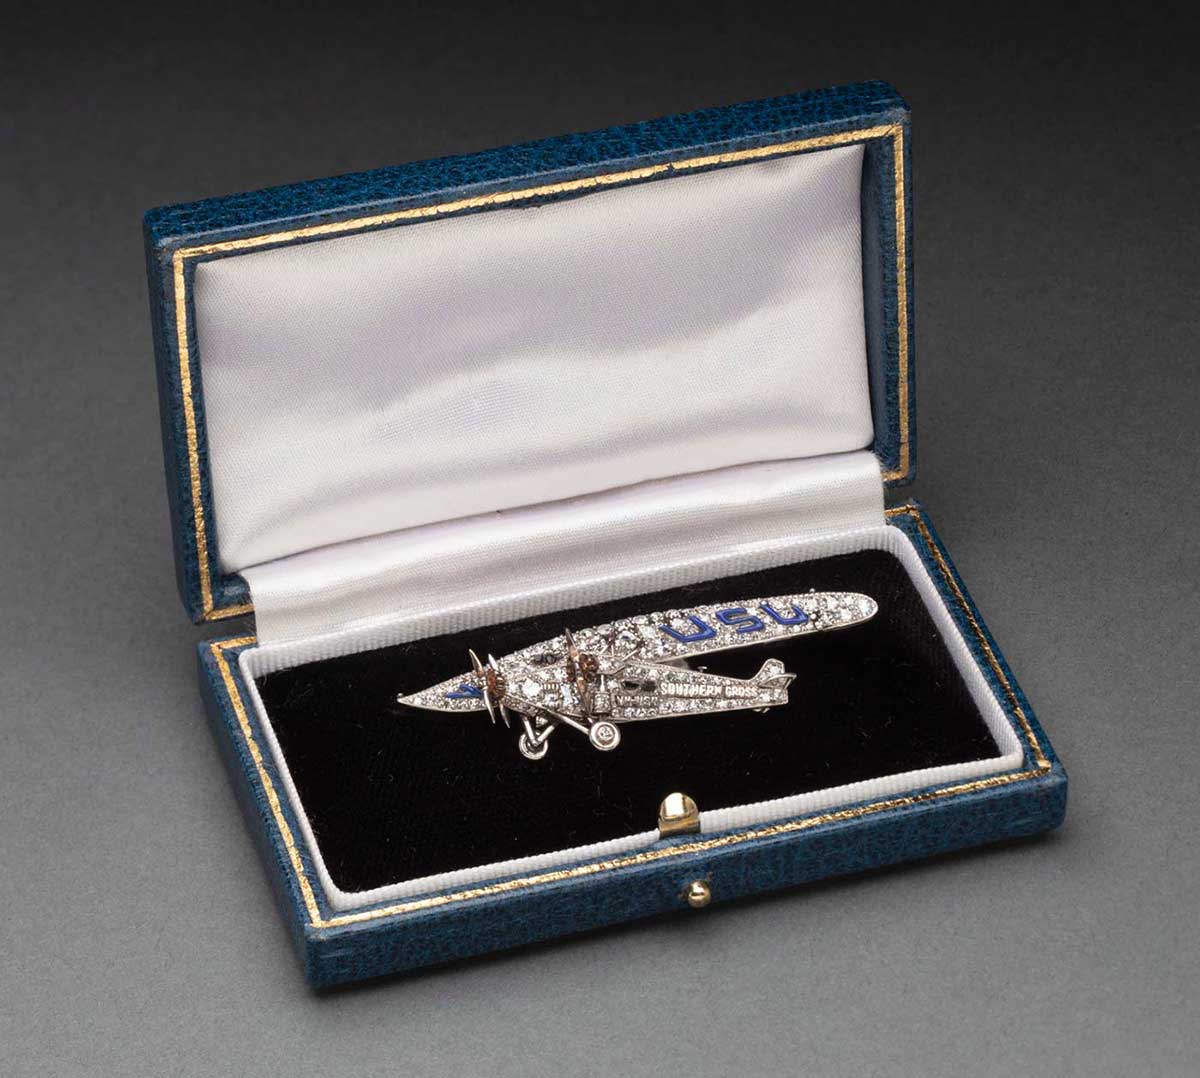 A diamond and platinum brooch in the form of an aeroplane in a blue rectangular box with gold detailing and a push button latch. On the brooch there are sapphires forming the windows and blue enamel on the wings. The side of the plane reads 'VH-USU / Southern Cross'. The interior of the box lid is covered in white coloured fabric and the base is covered in black coloured fabric. - click to view larger image